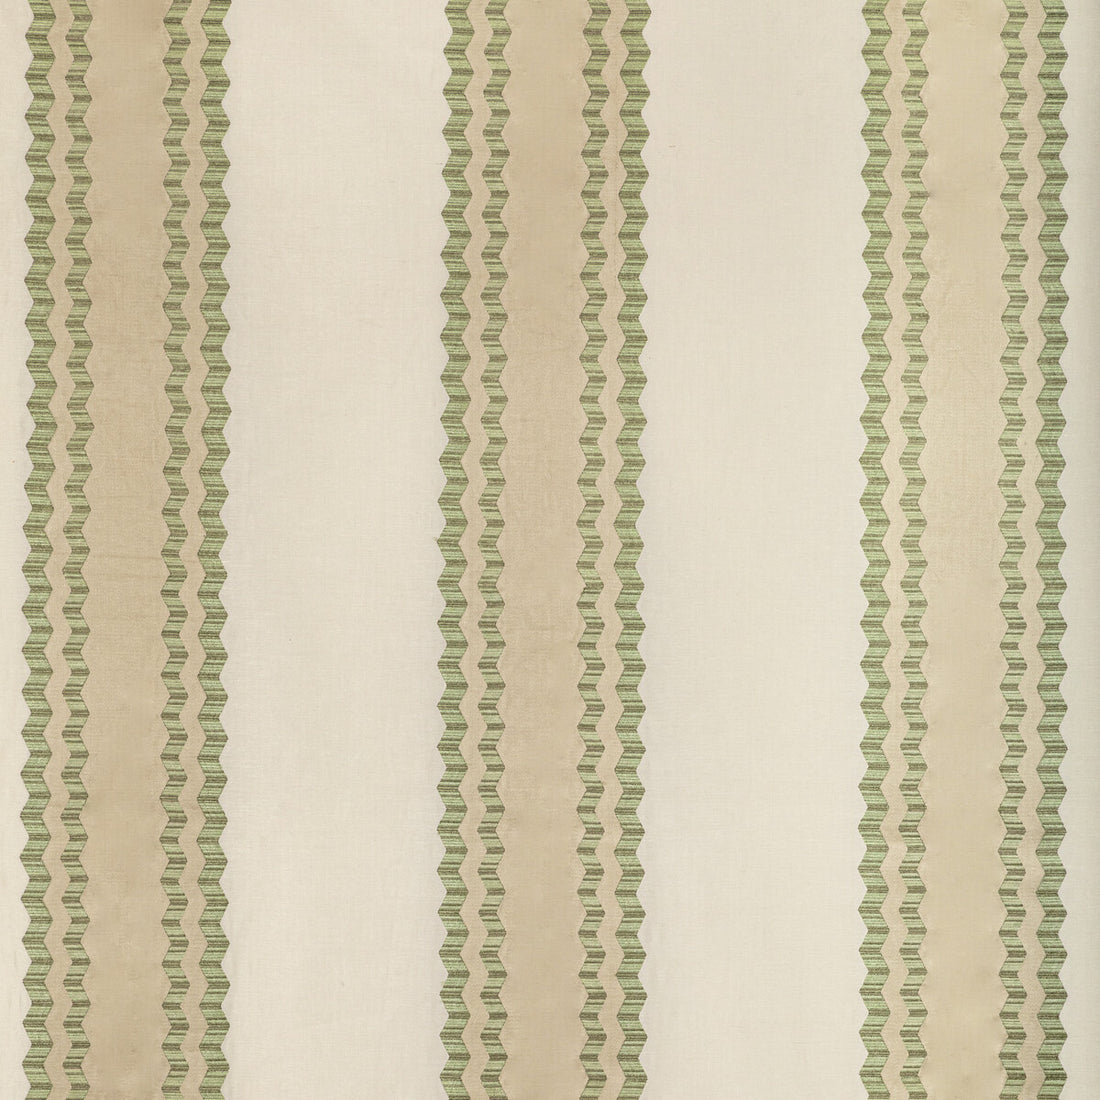 Waldon Stripe fabric in celery color - pattern 2022113.1623.0 - by Lee Jofa in the Bunny Williams Arcadia collection